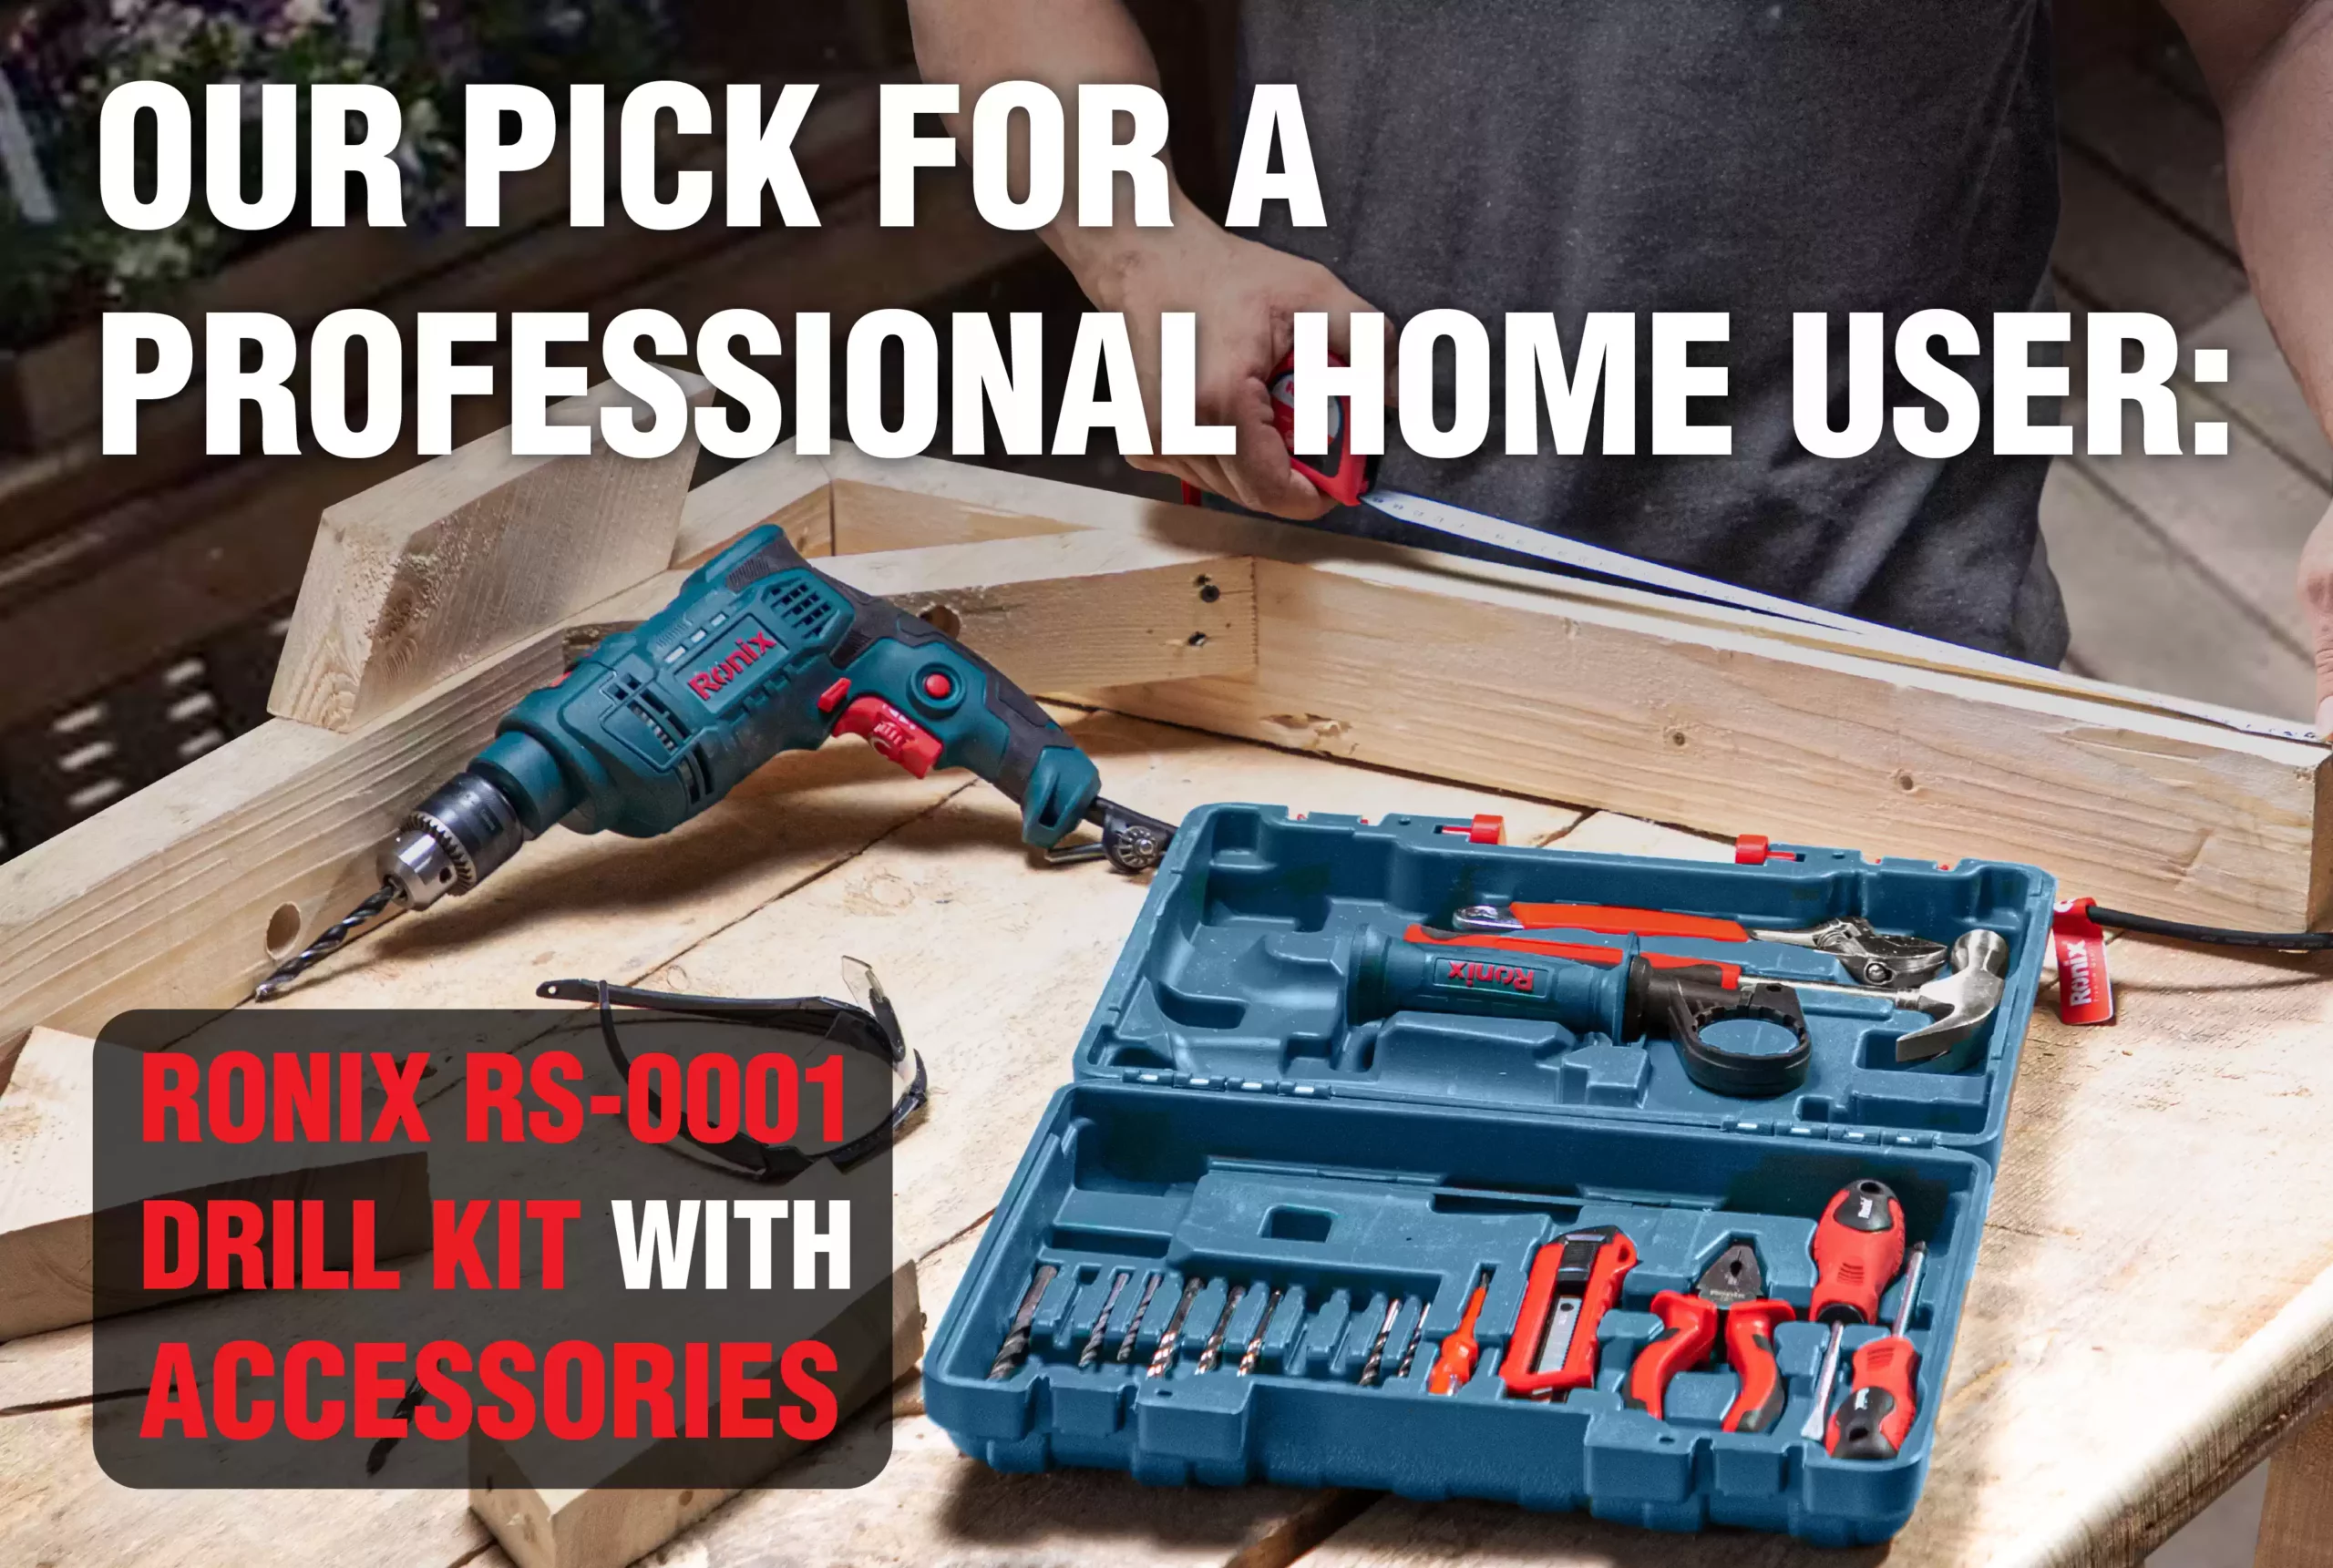 Power and performance for homeowners power tools